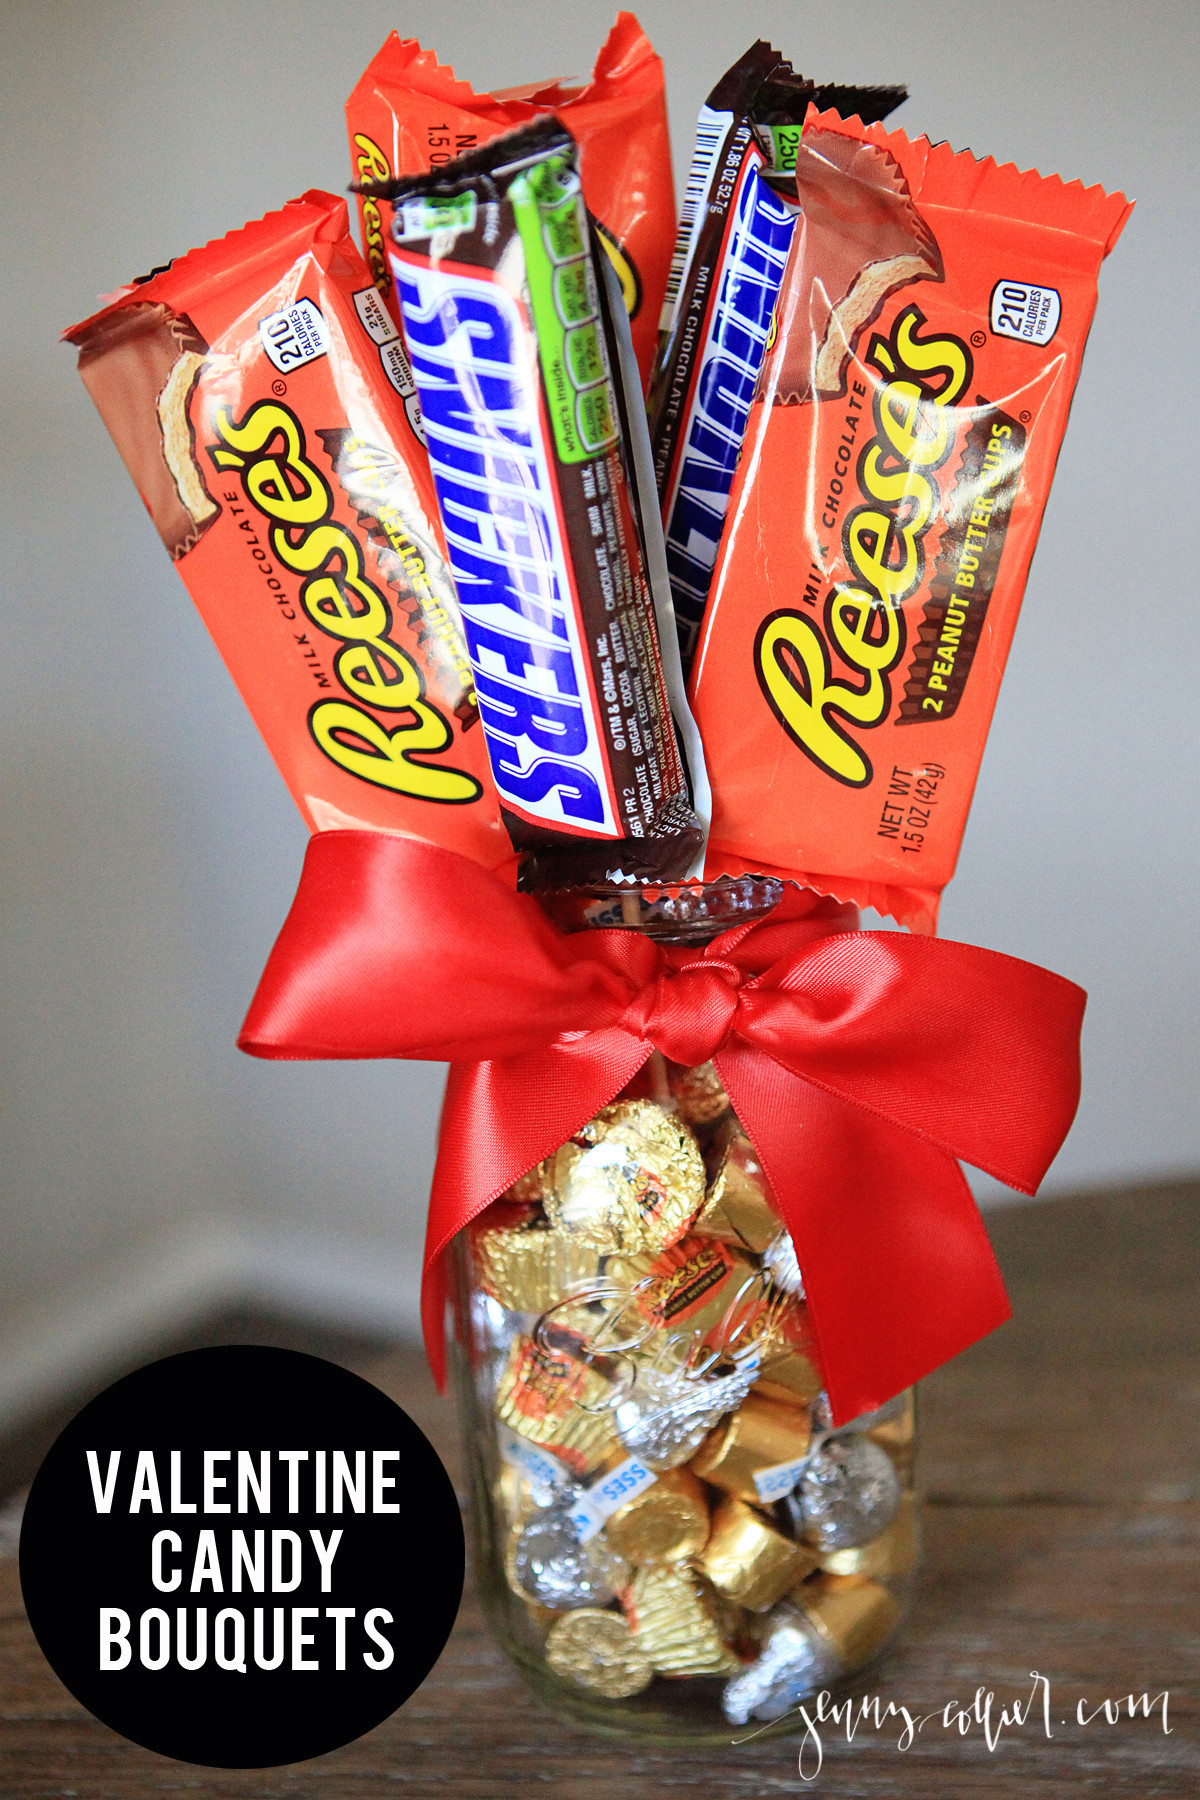 Valentines Candy Gift Ideas
 Valentine Candy Bouquets